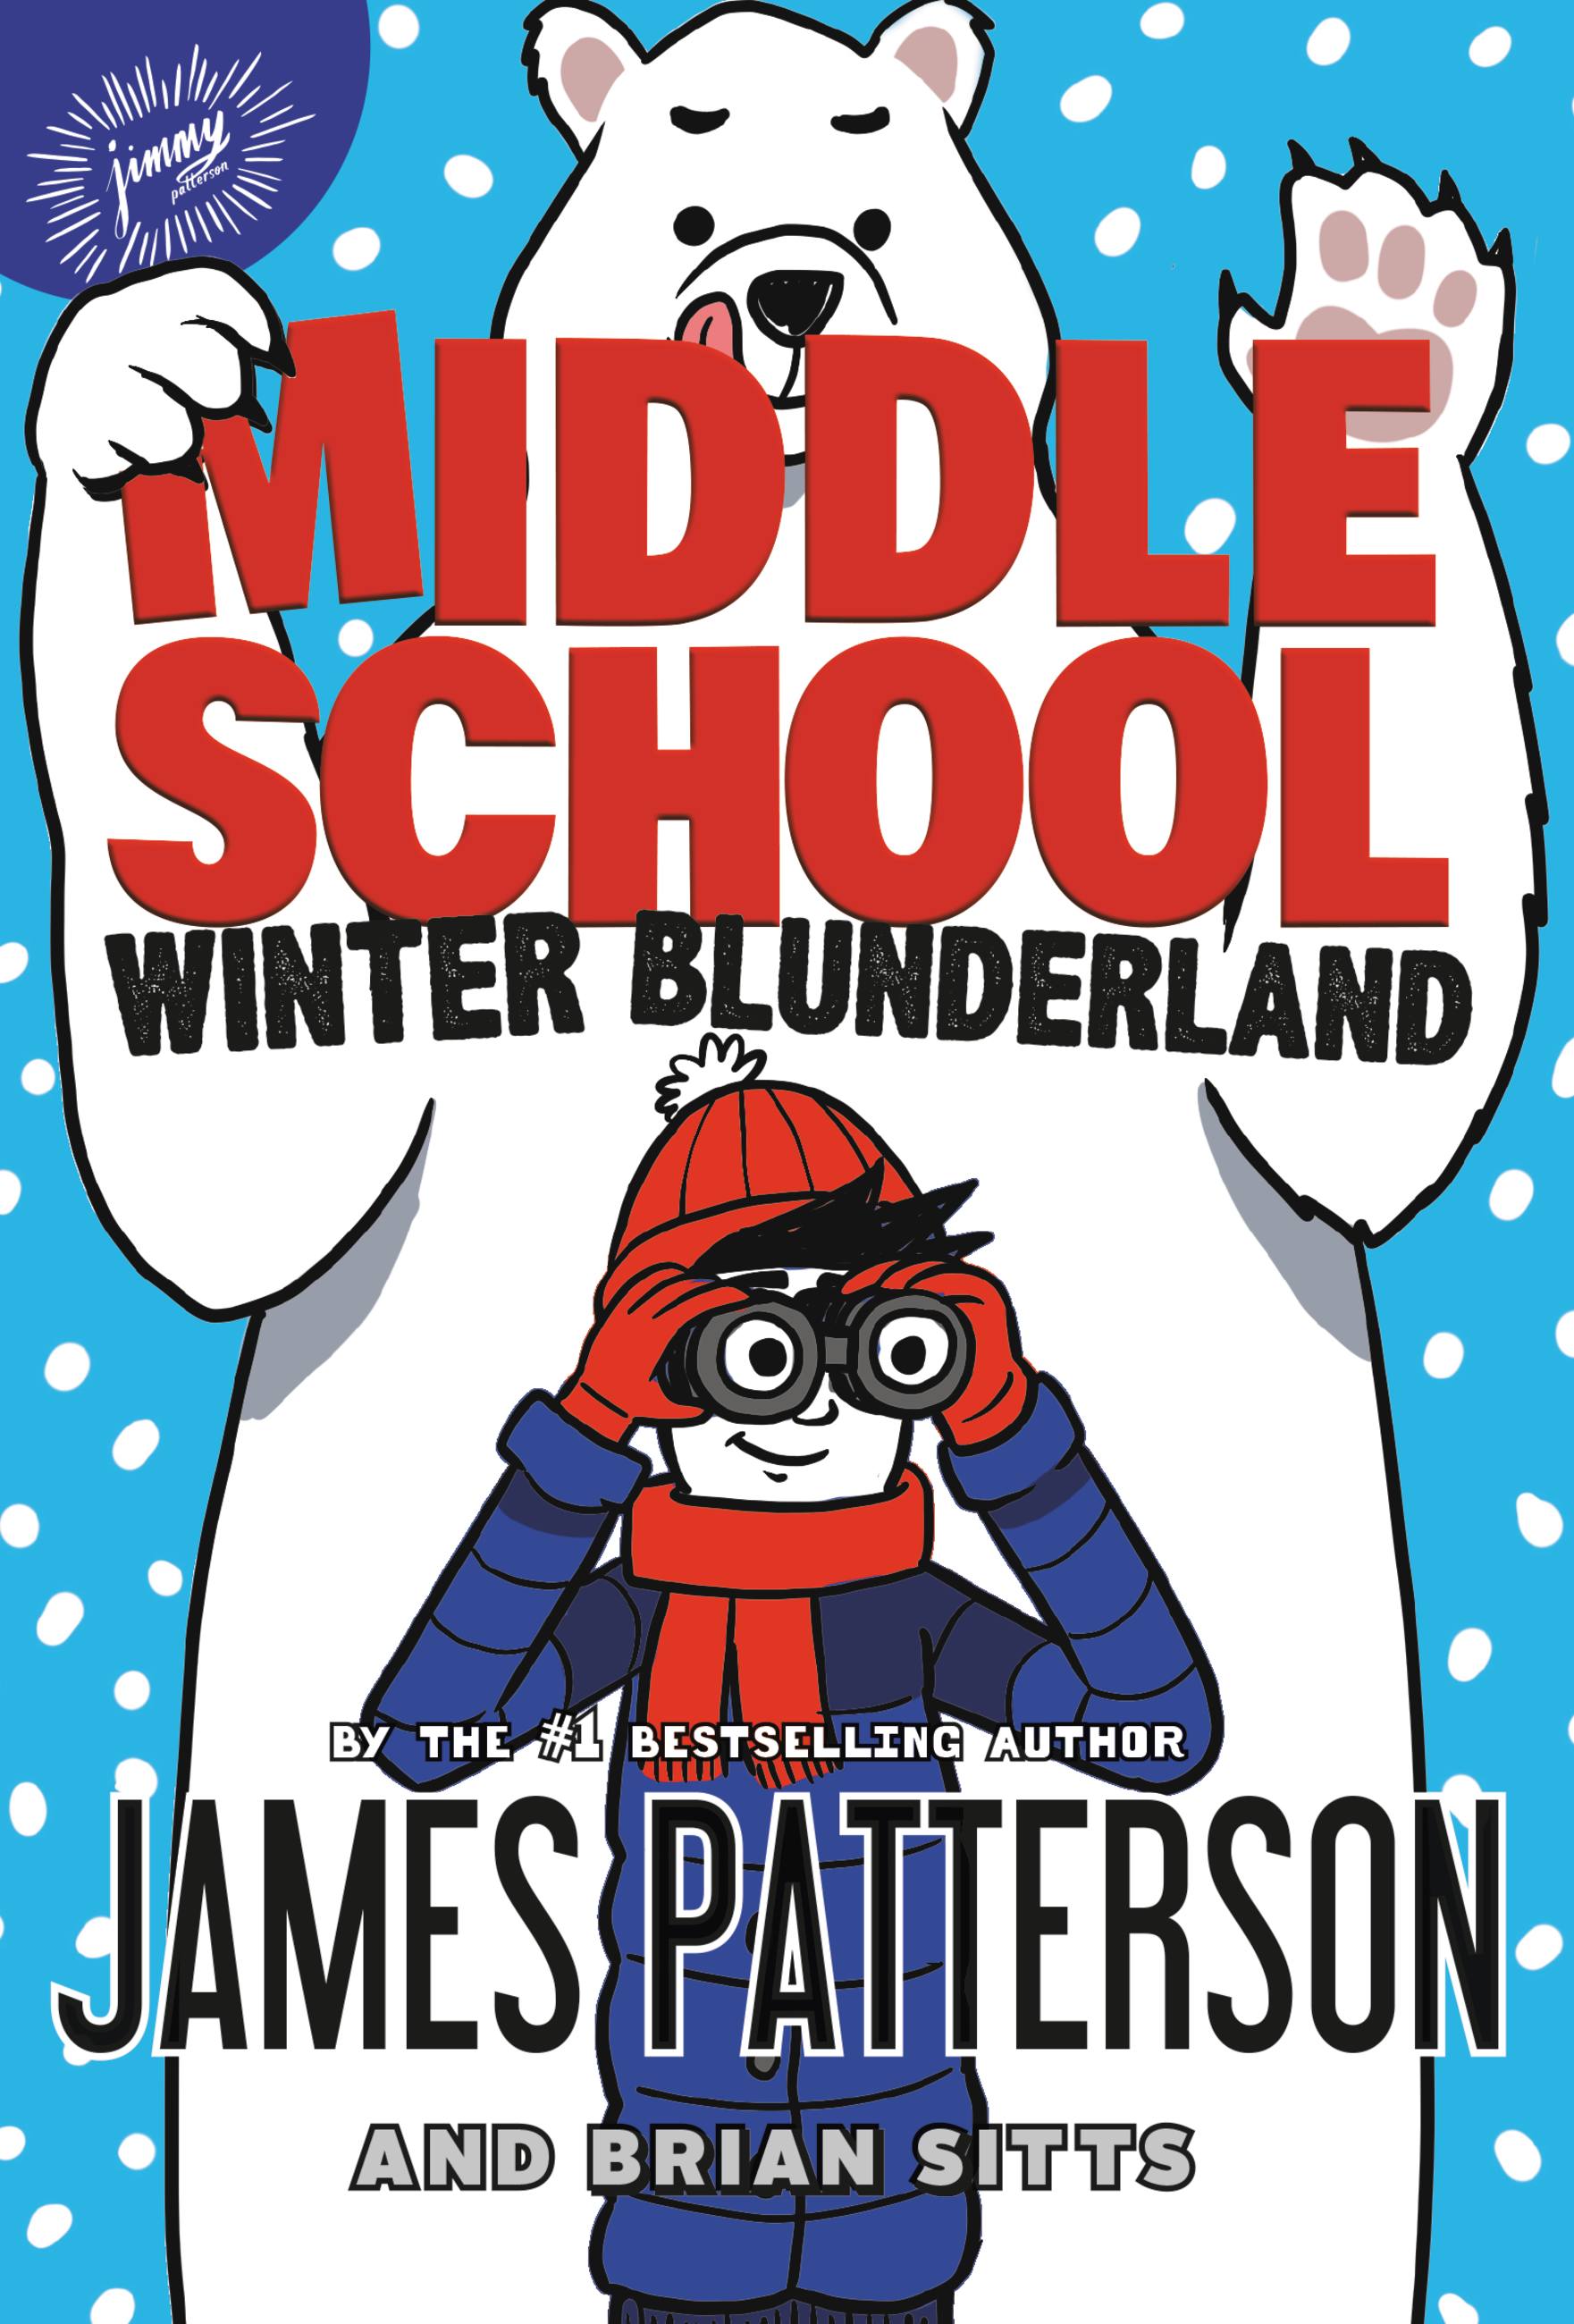 James Patterson's Books for Kids